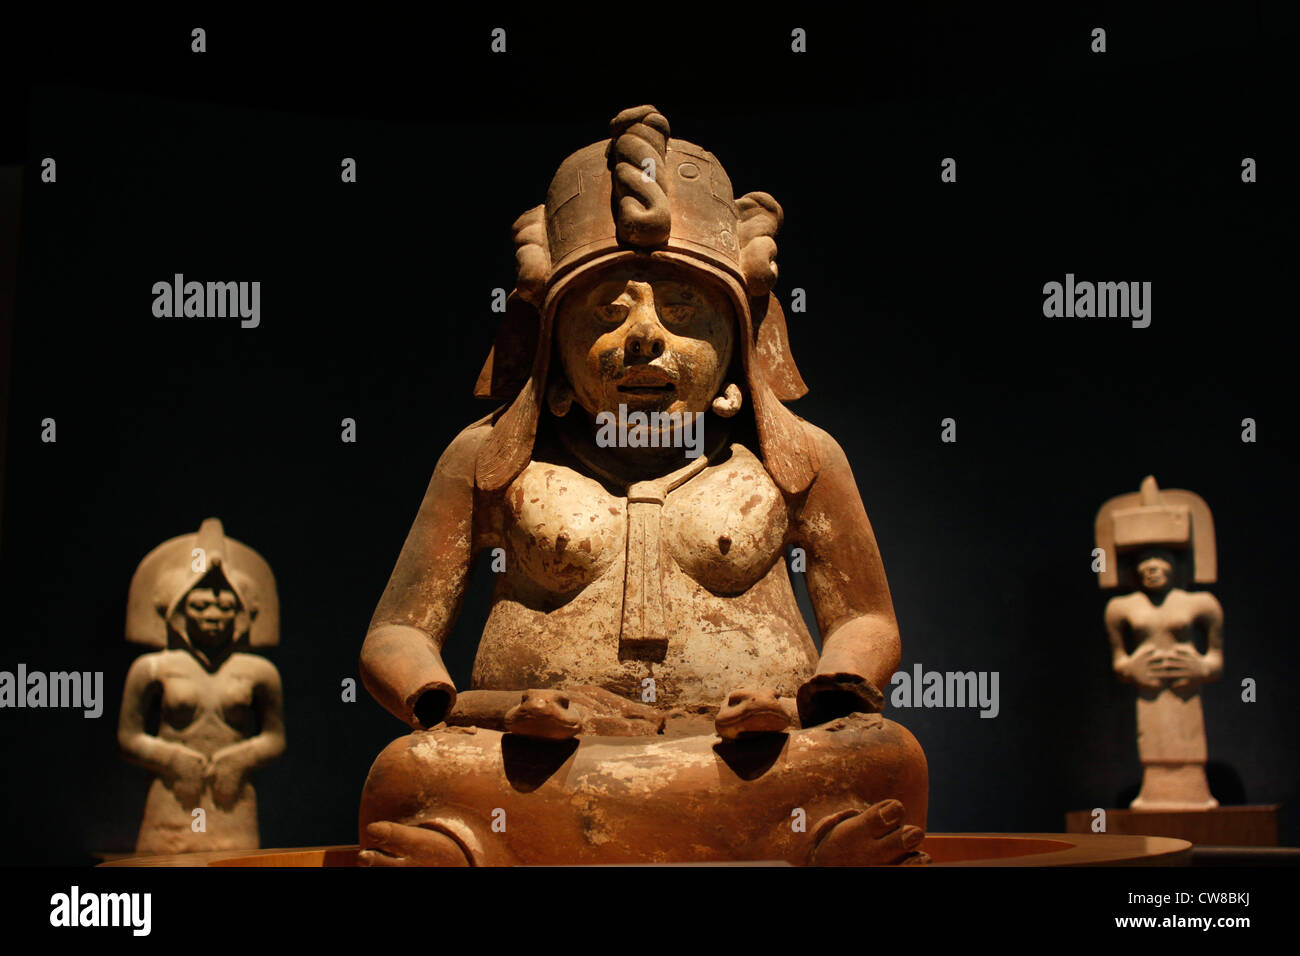 Mesoamerican sculptures are displayed in the National Museum of Anthropology in Mexico City Stock Photo